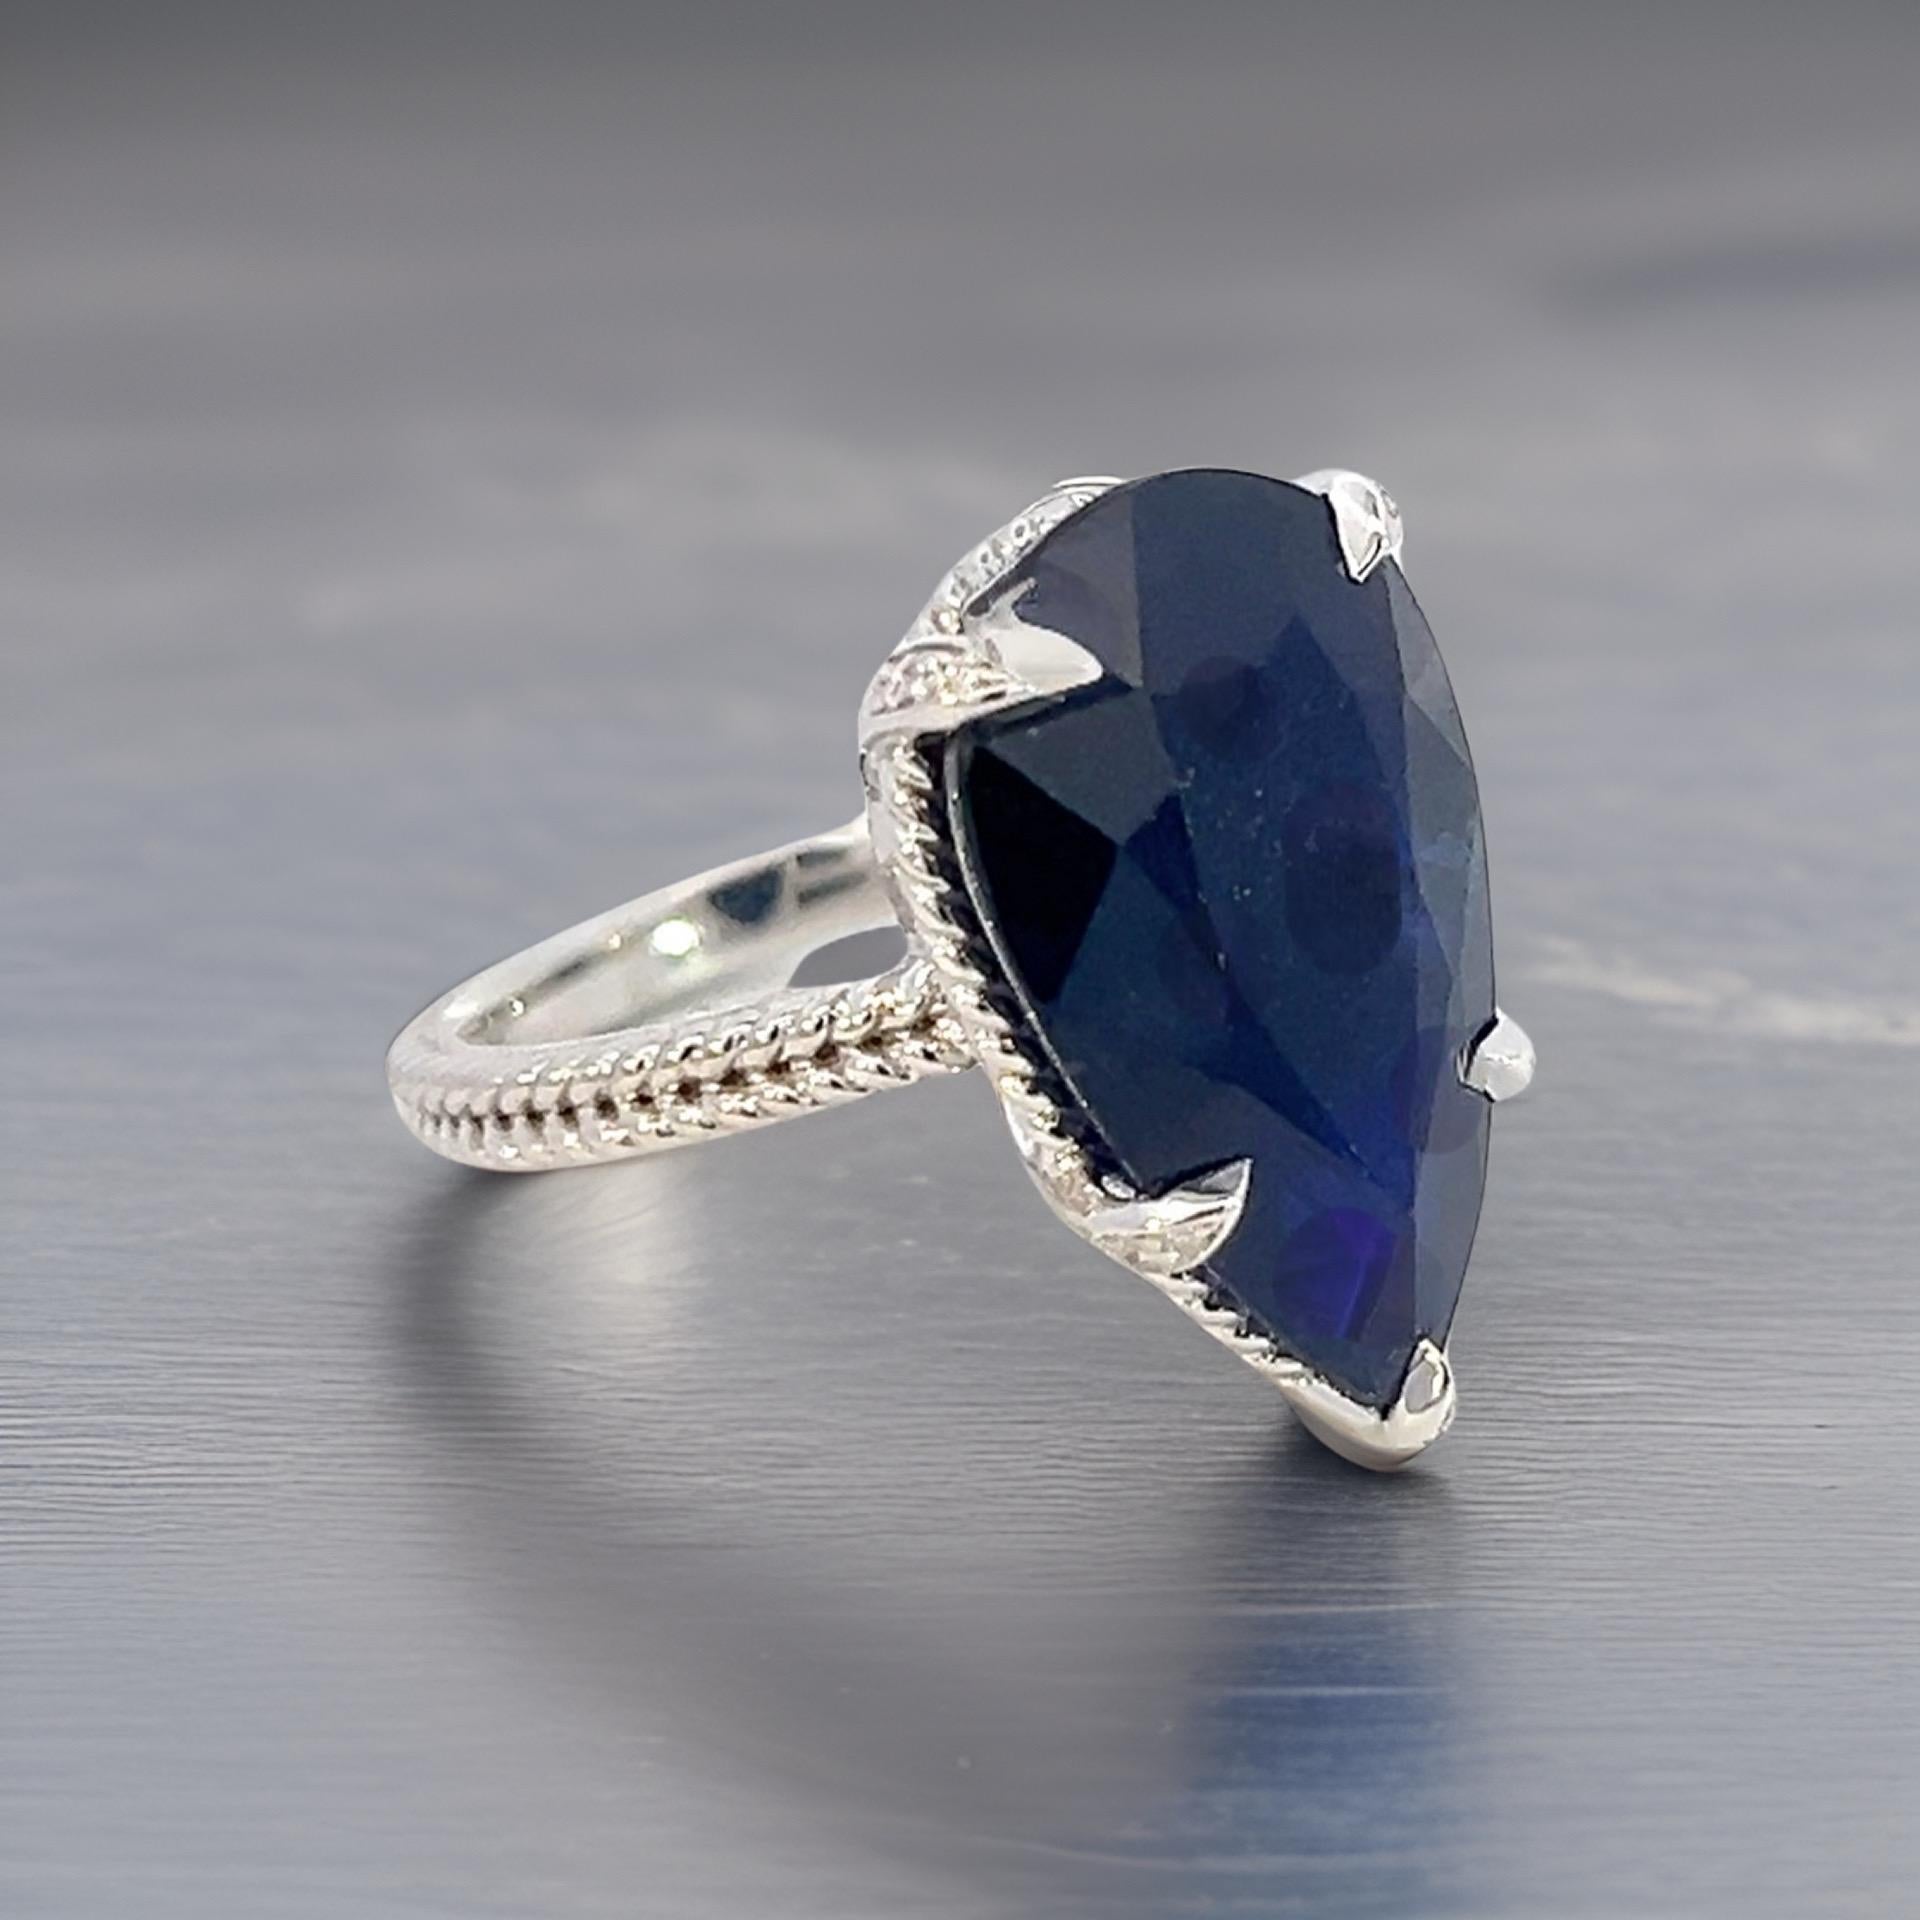 Natural Solitaire Sapphire Ring 6.5 14k W Gold 15.2 TCW Certified In Good Condition For Sale In Brooklyn, NY